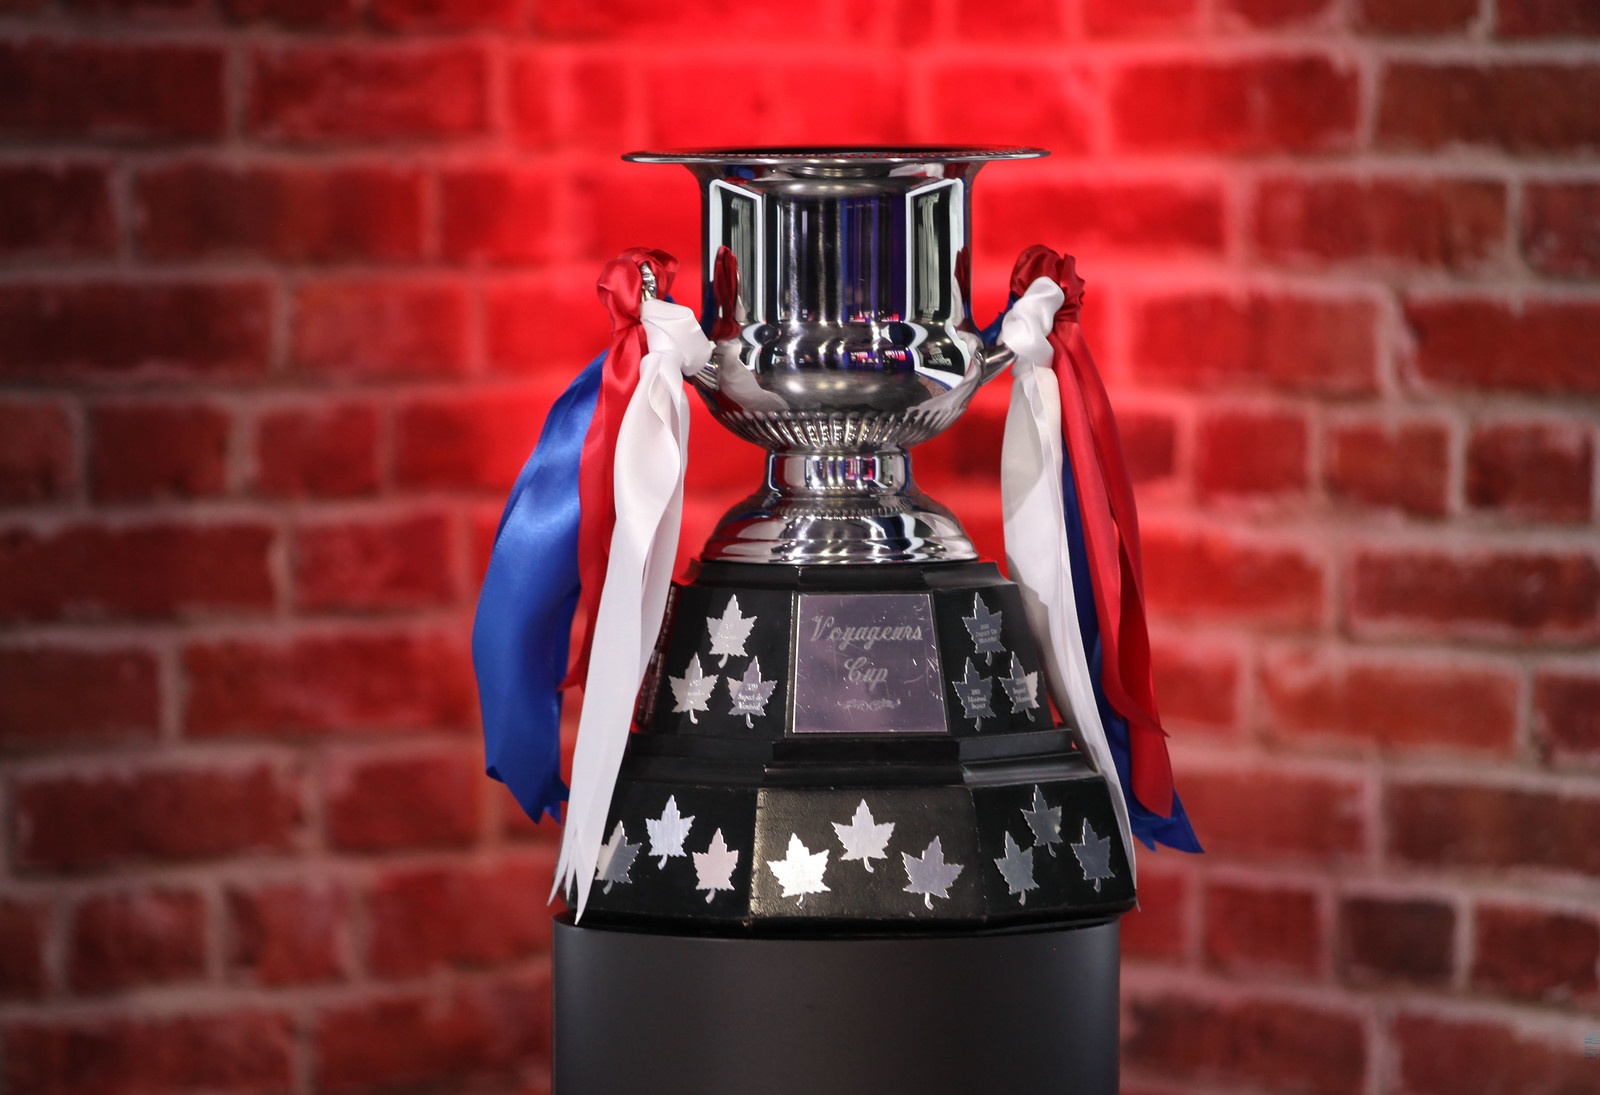 Voyageurs Cup - Wikipedia